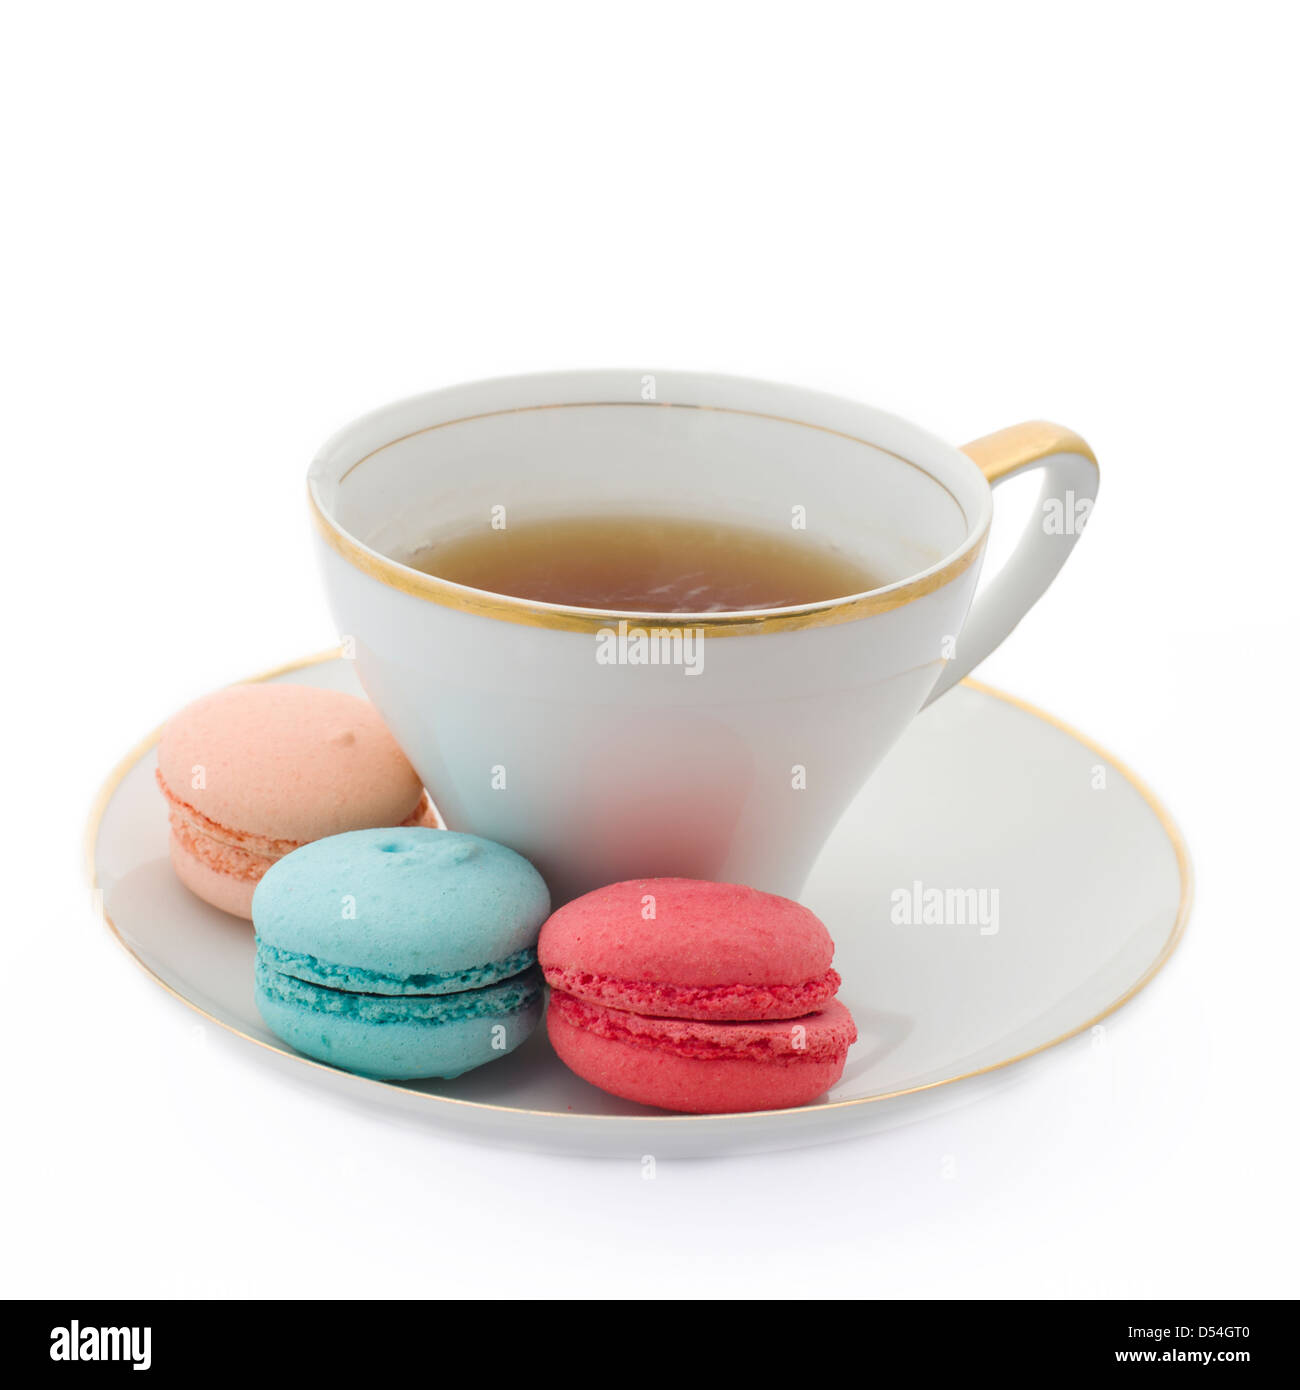 Cup of tea with three Macaron cookies in pink, blue and peach colors. Stock Photo